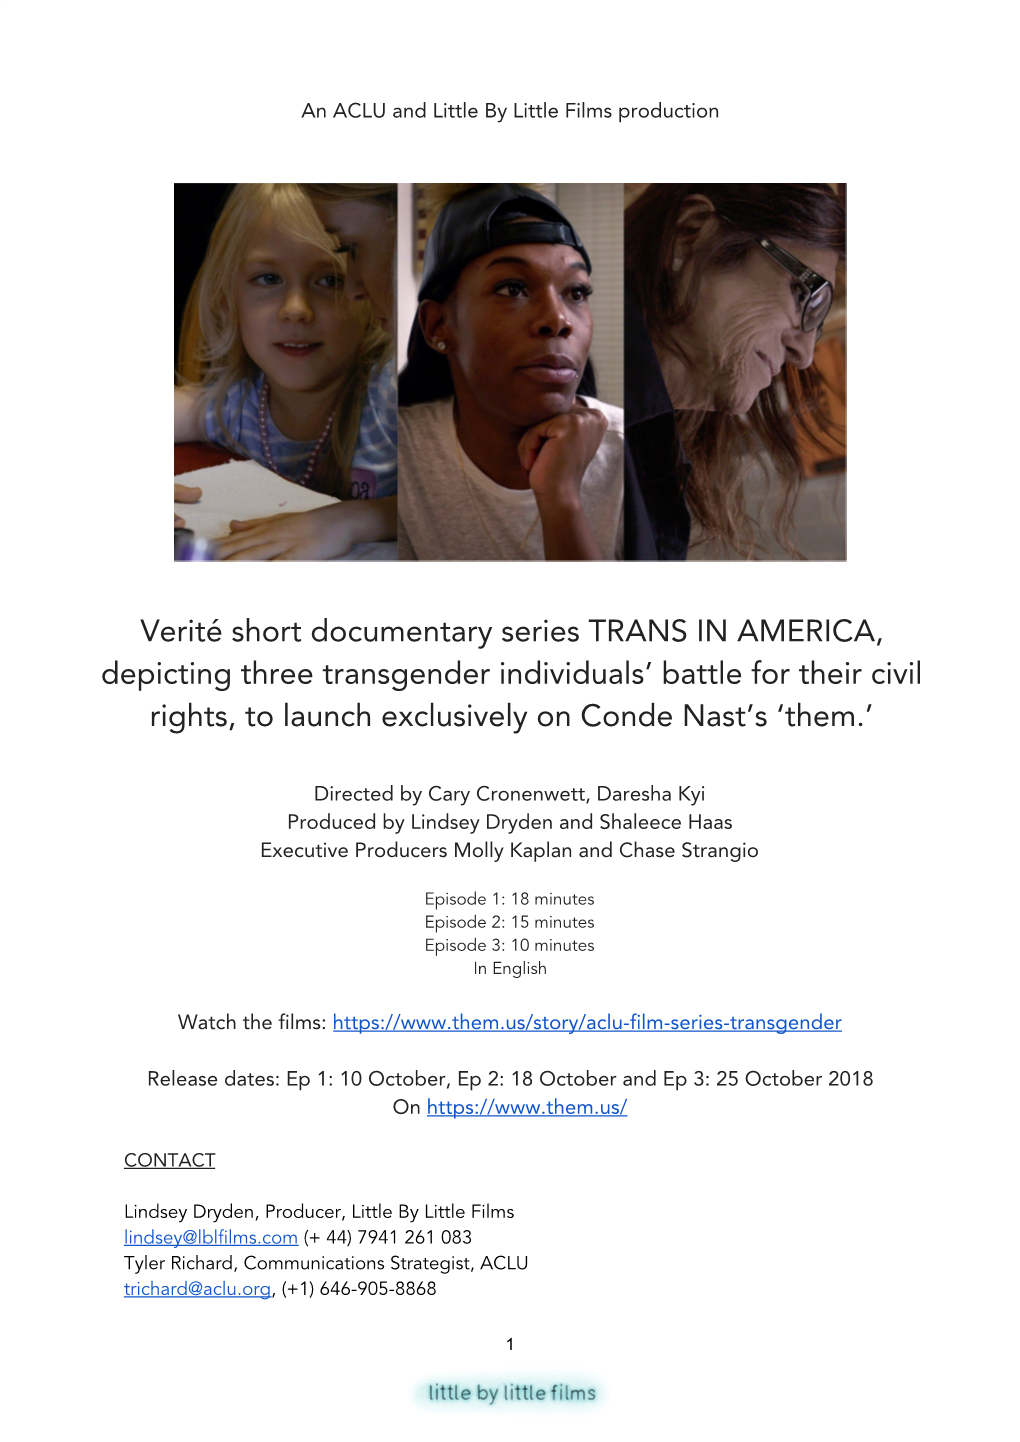 Verité Short Documentary Series TRANS in AMERICA, Depicting